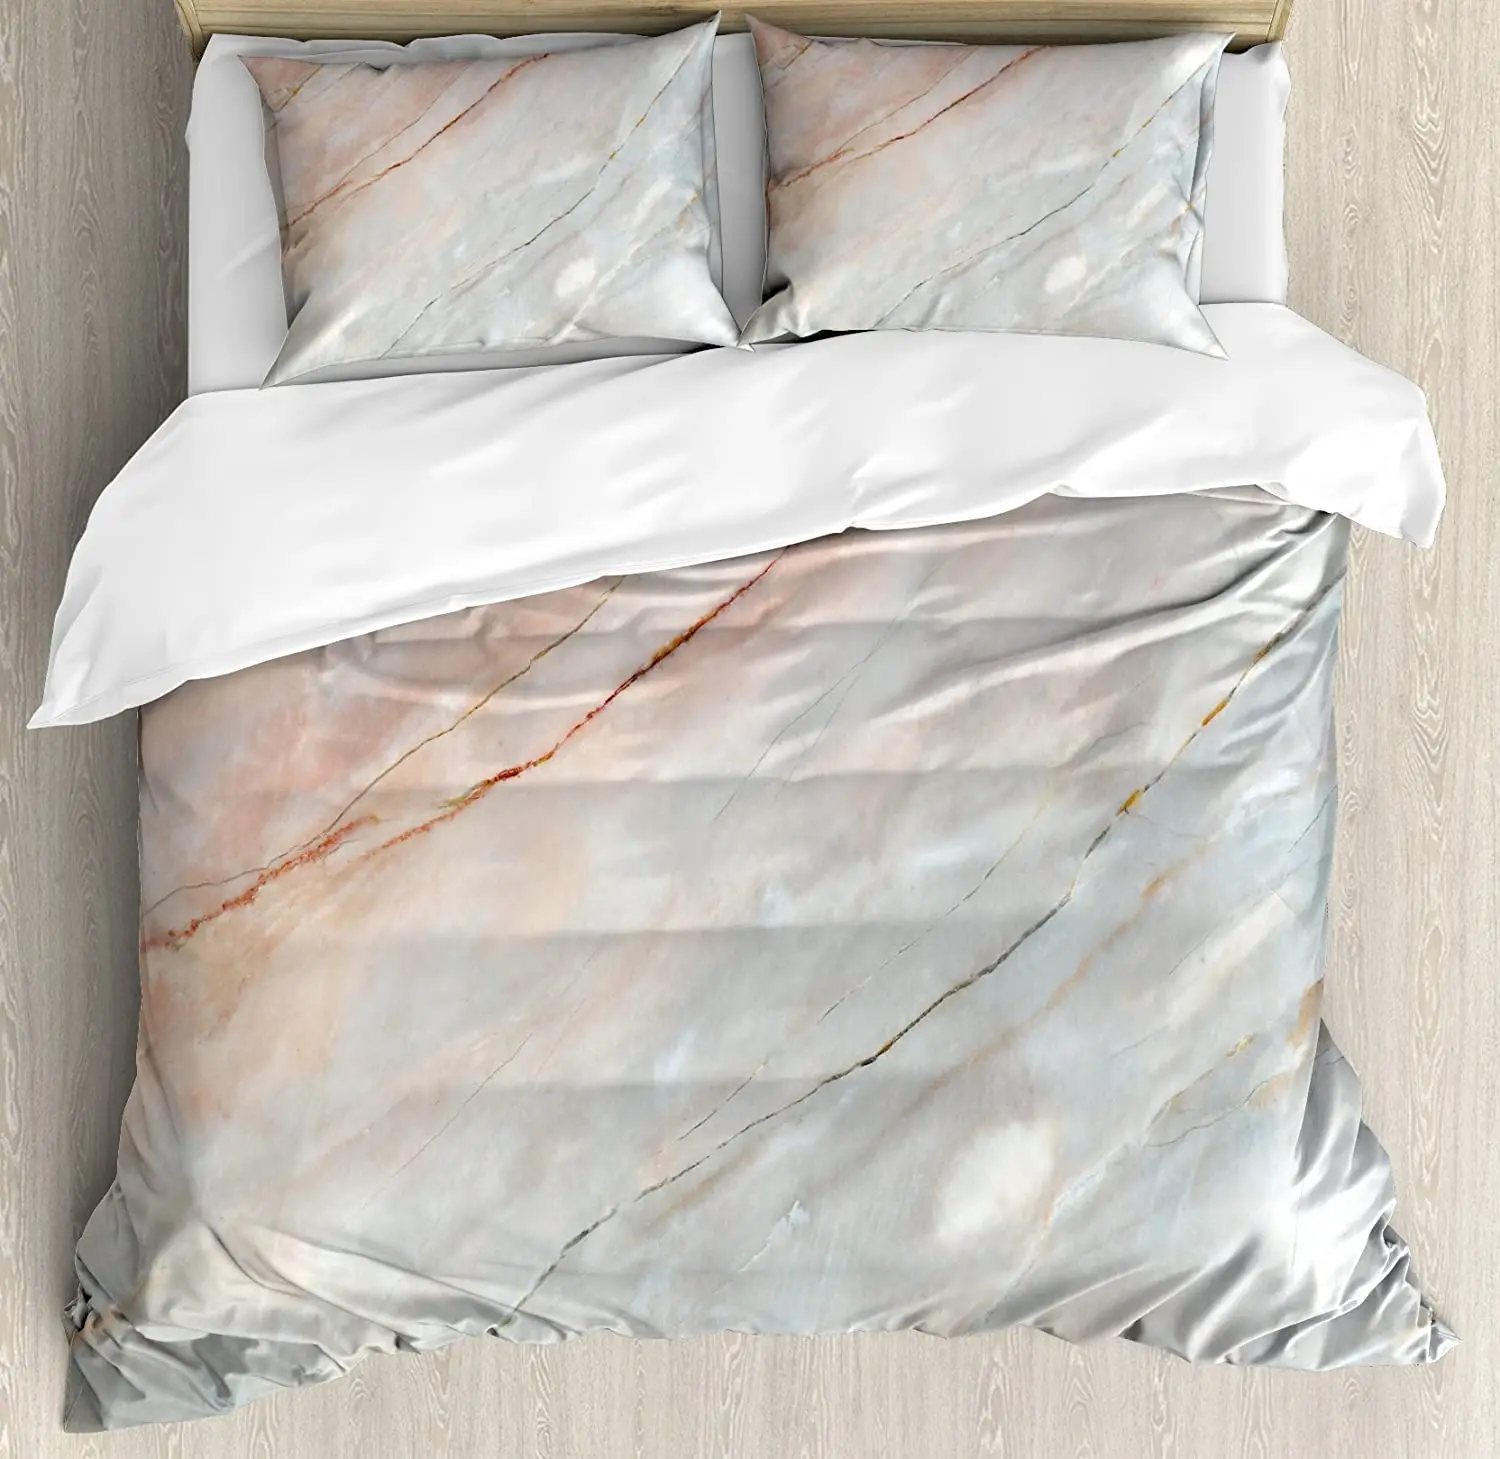 

Marble Bedding Set For Bedroom Bed Home Onyx Stone Textured Natural Featured Authentic Scr Duvet Cover Quilt Cover Pillowcase